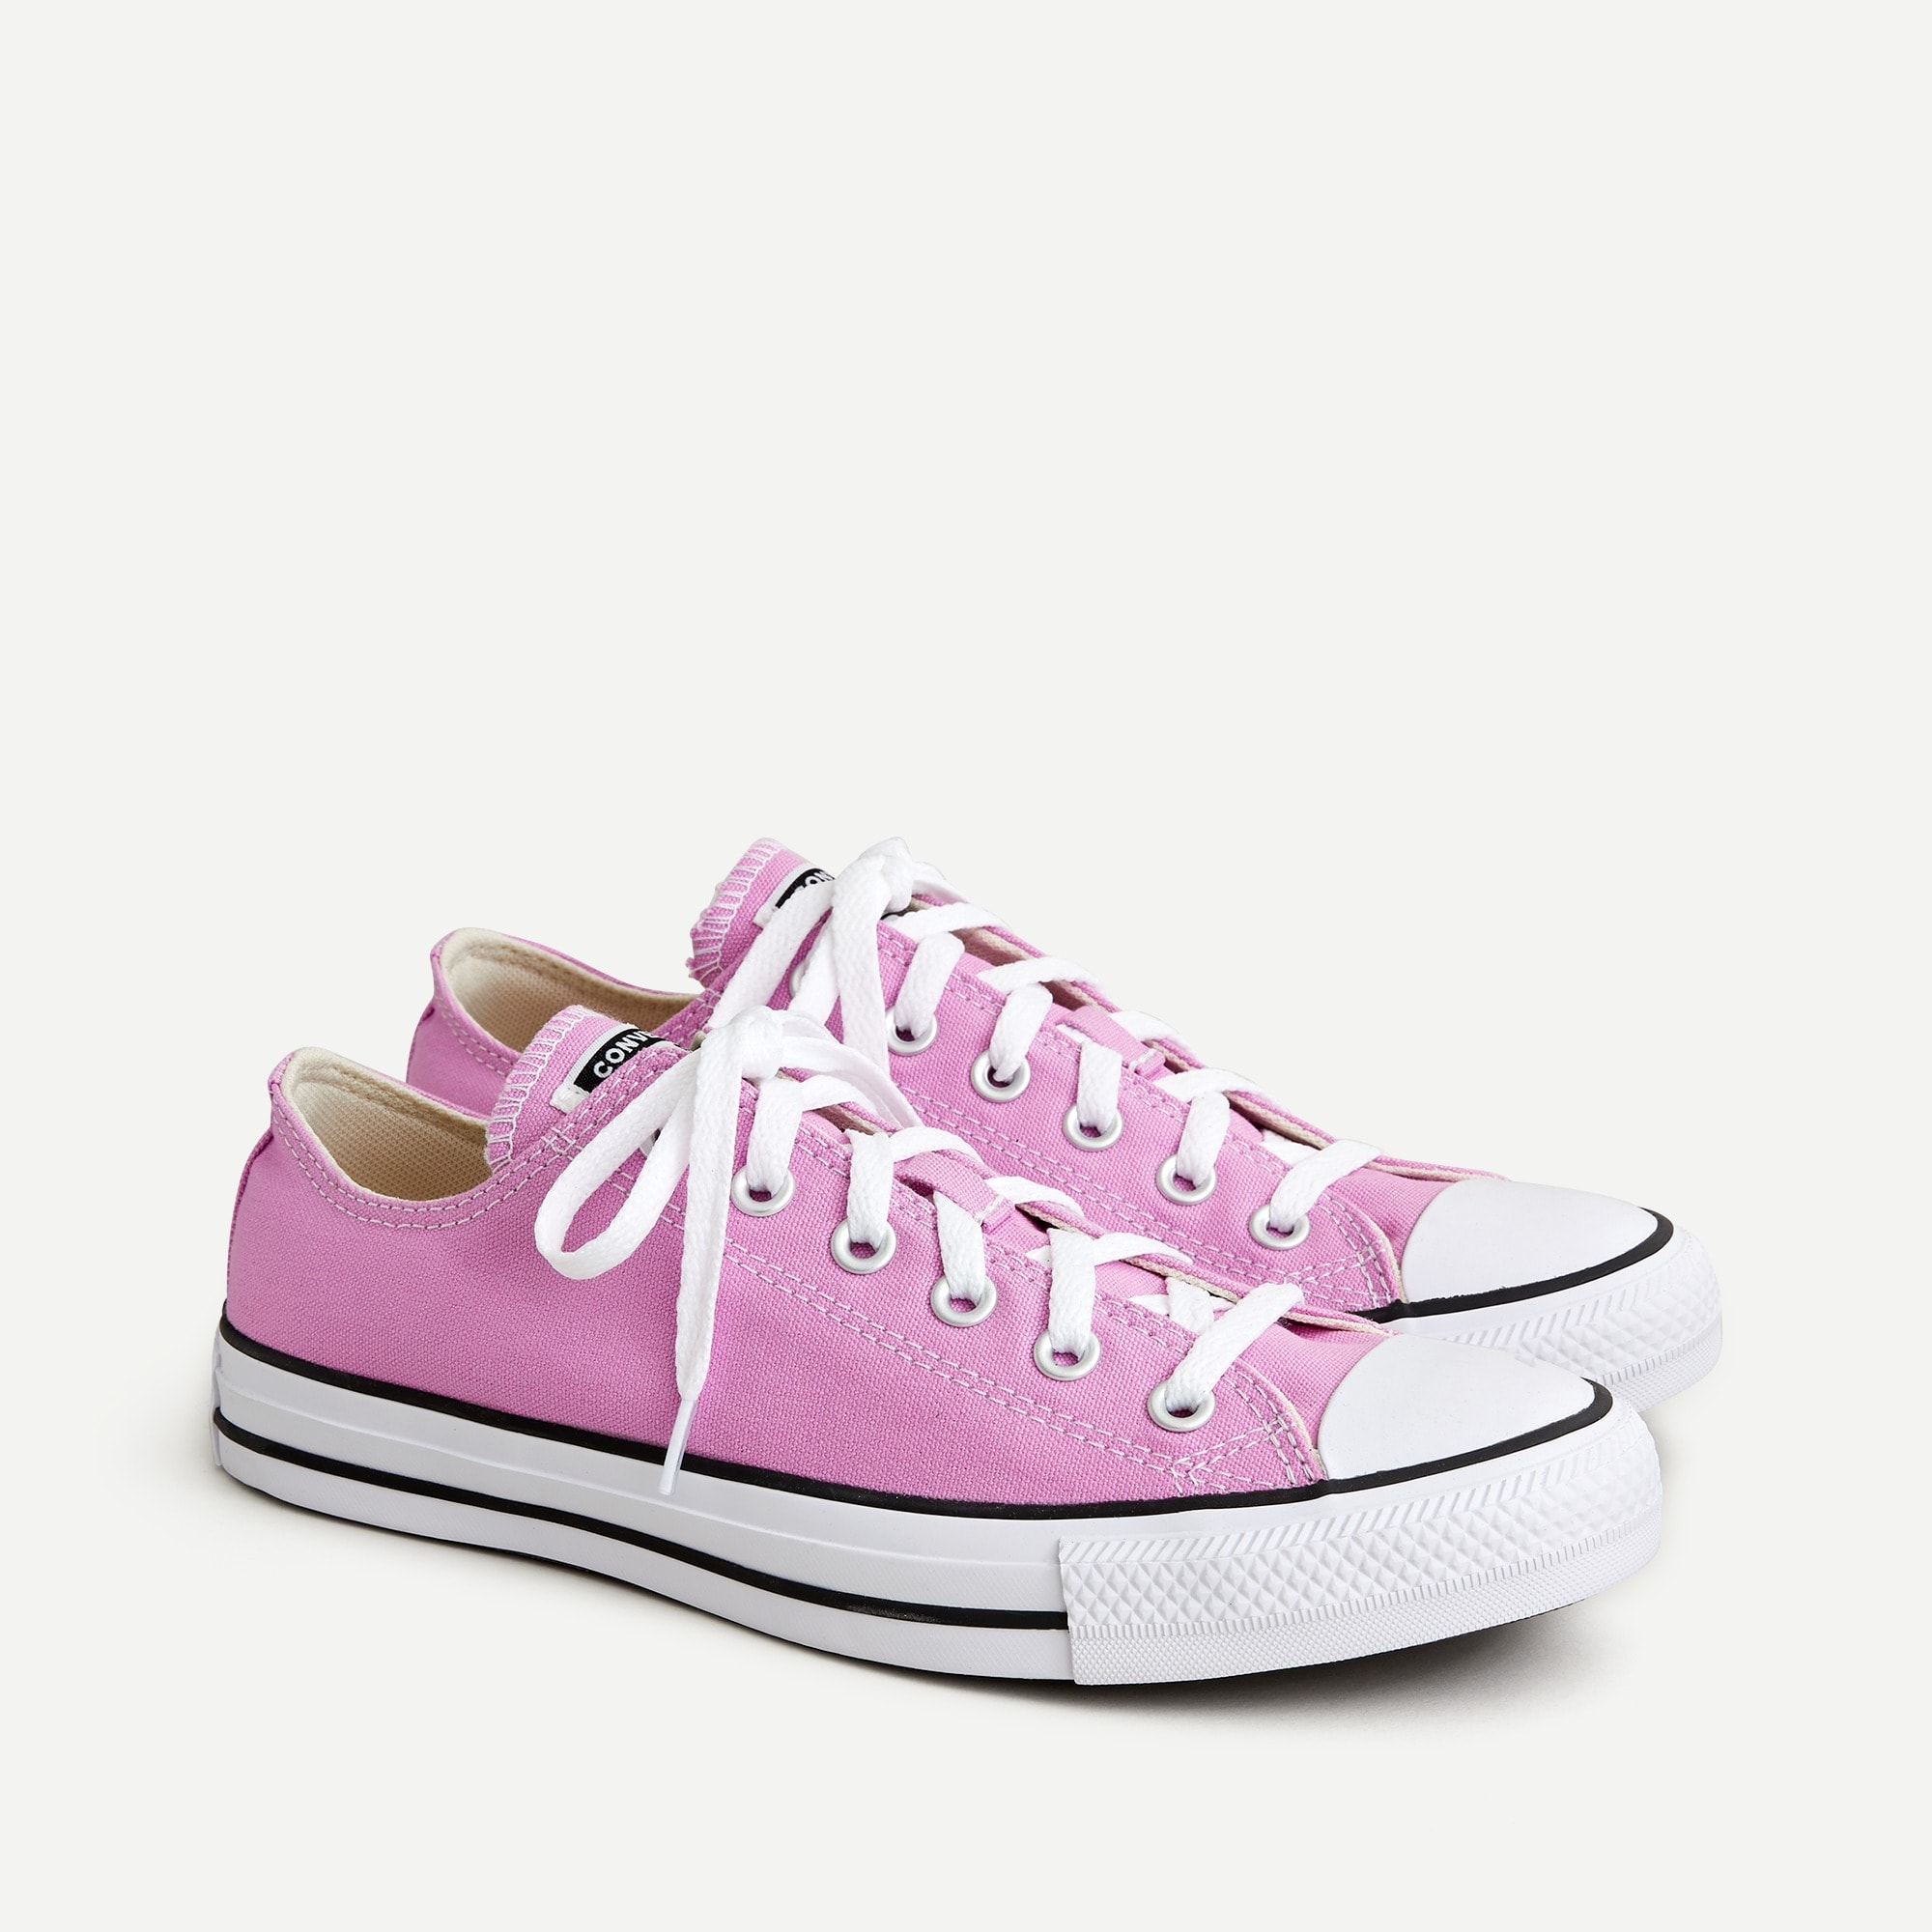 J.Crew: Converse® Chuck Taylor All Star Low-top Sneakers For Women